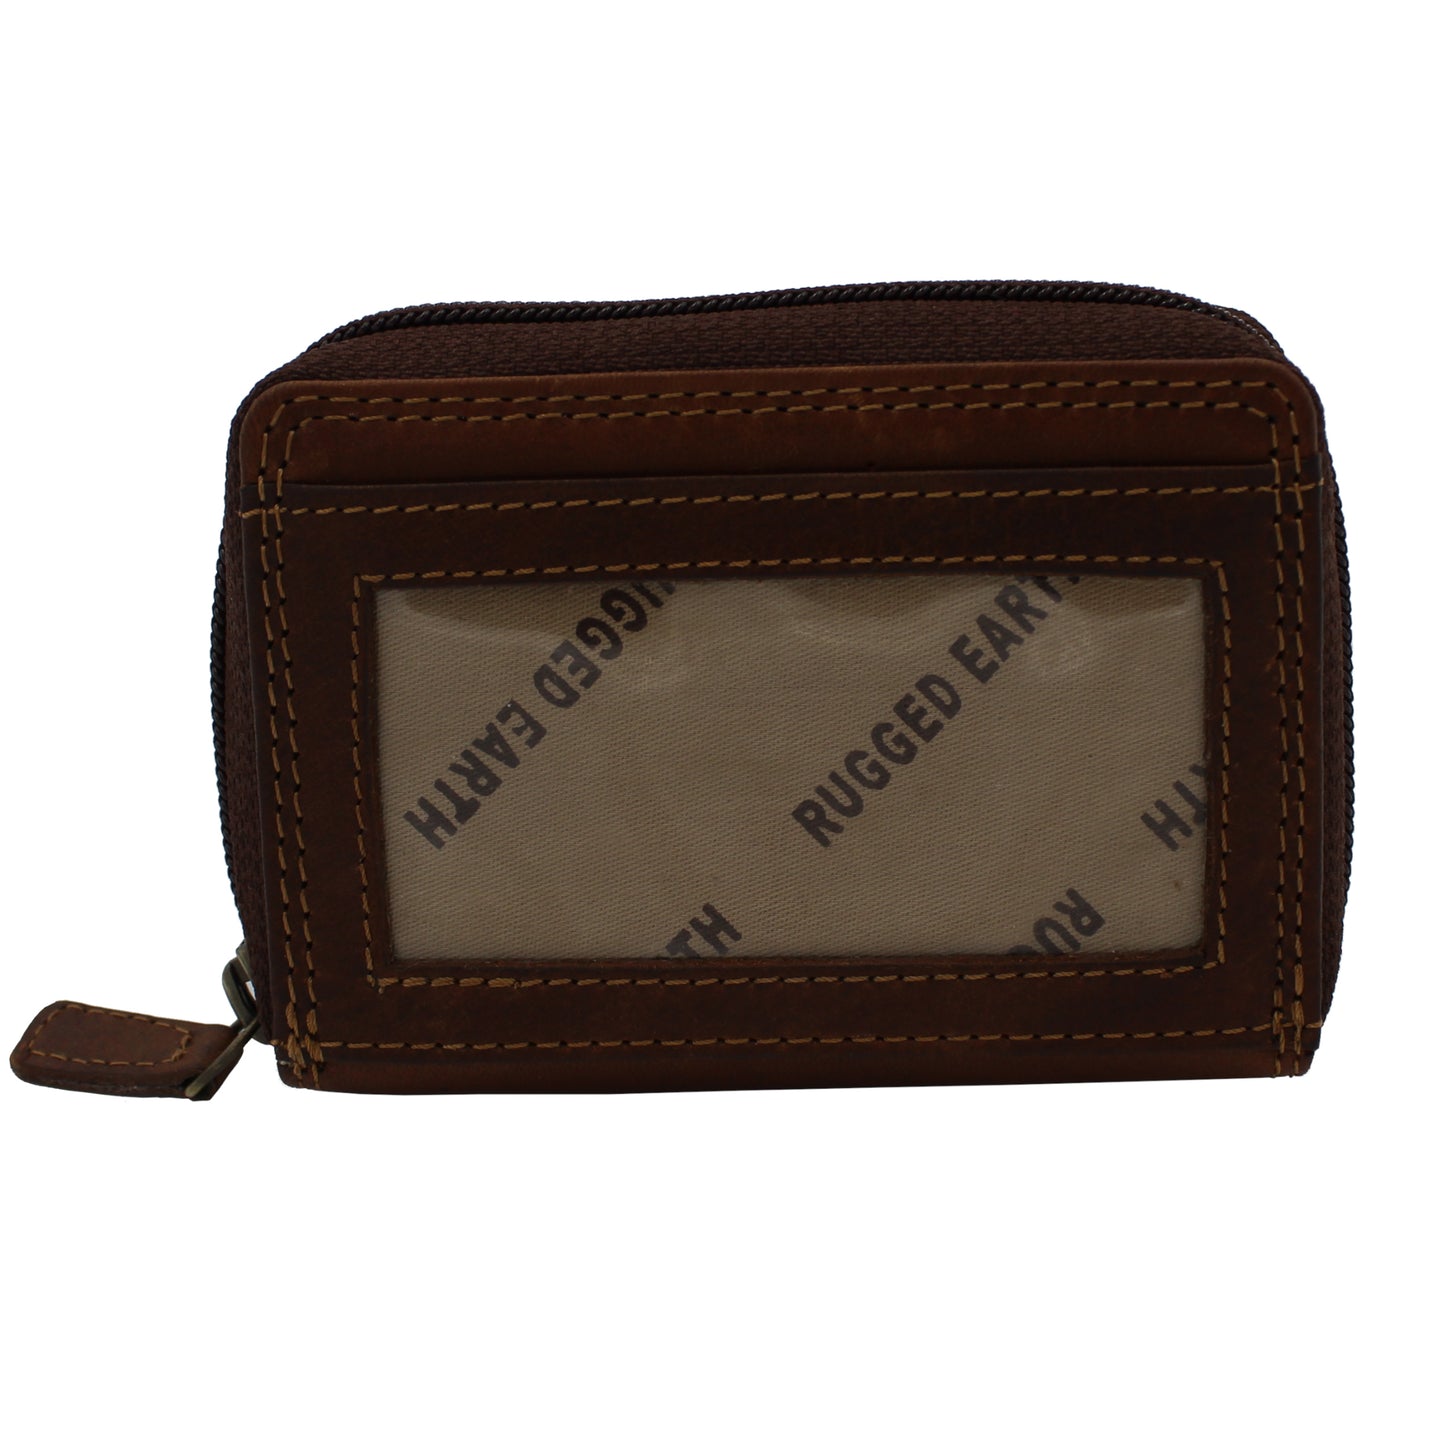 RE Leather Wallet -  11 Credit Card Slot